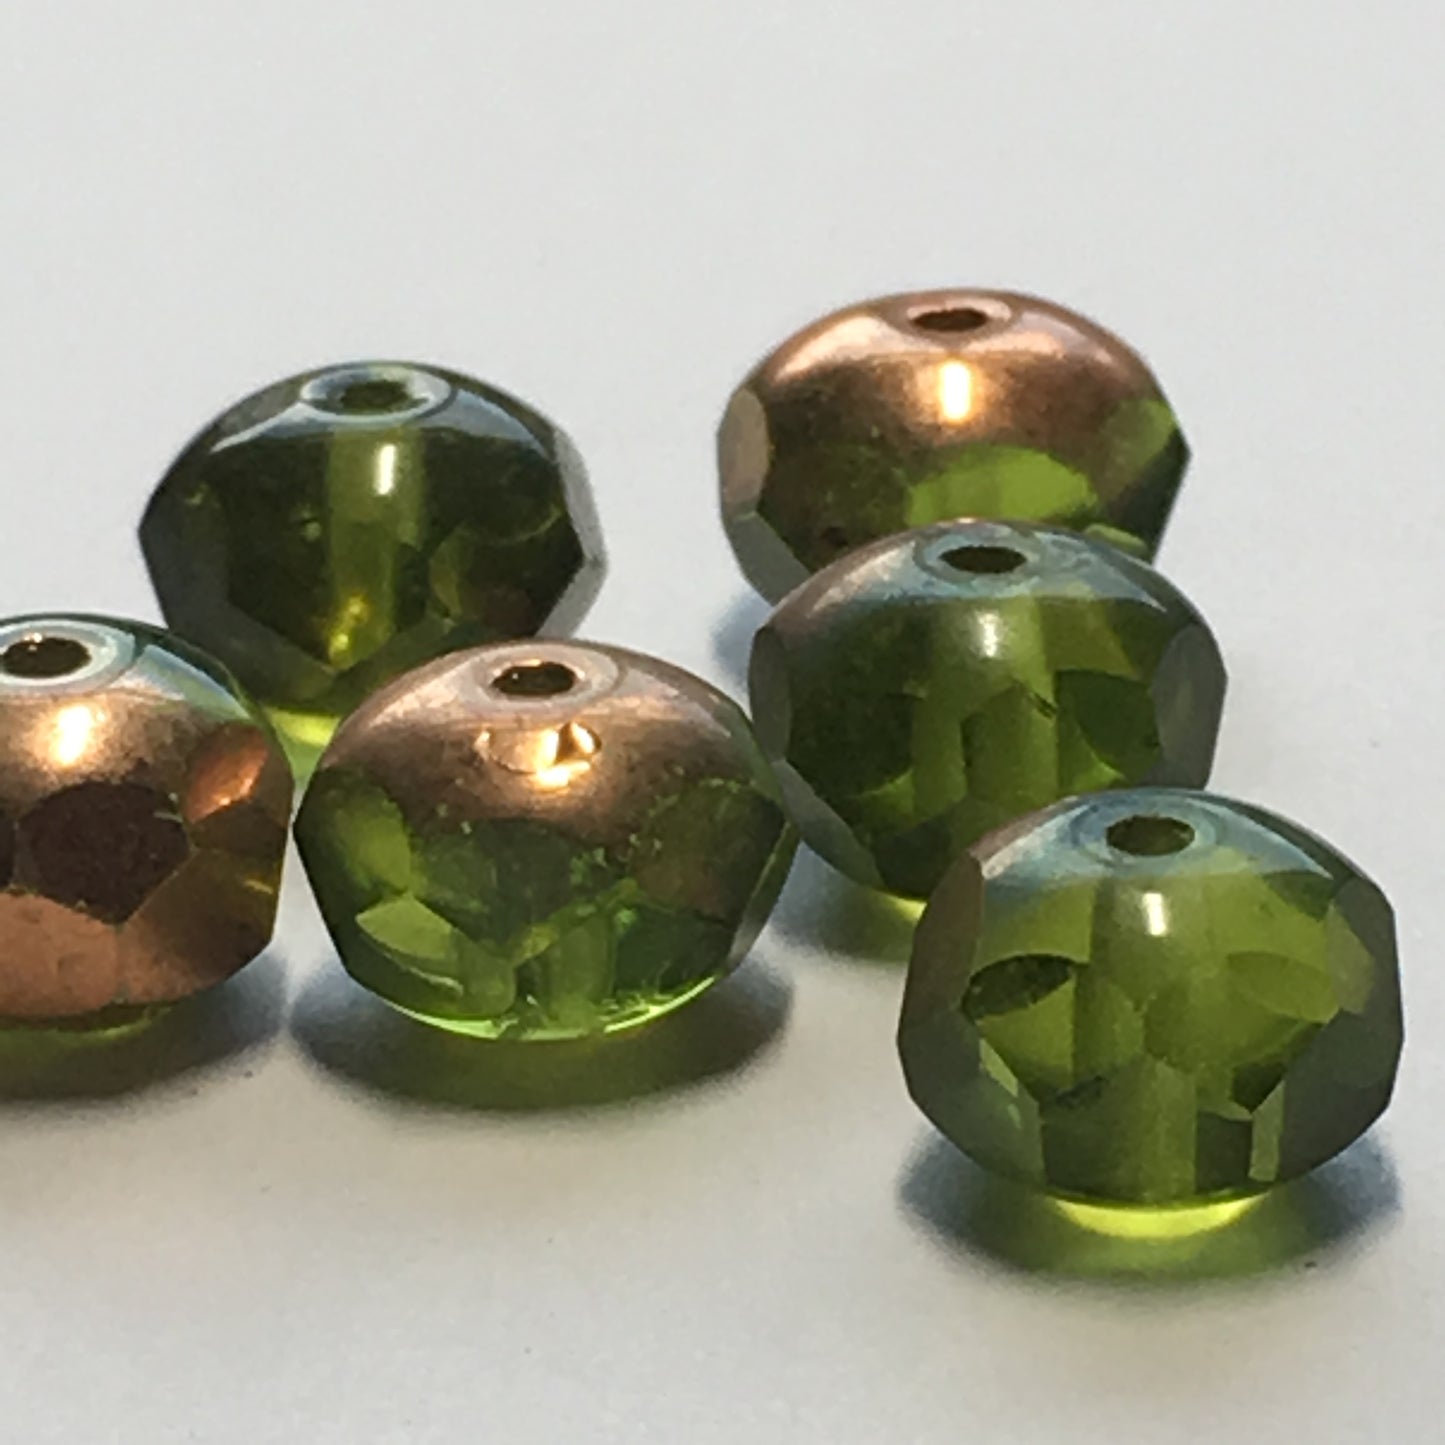 Transparent Green 1/2 Copper Glass Rondelle Beads, 5 x 8 mm - 6 Beads